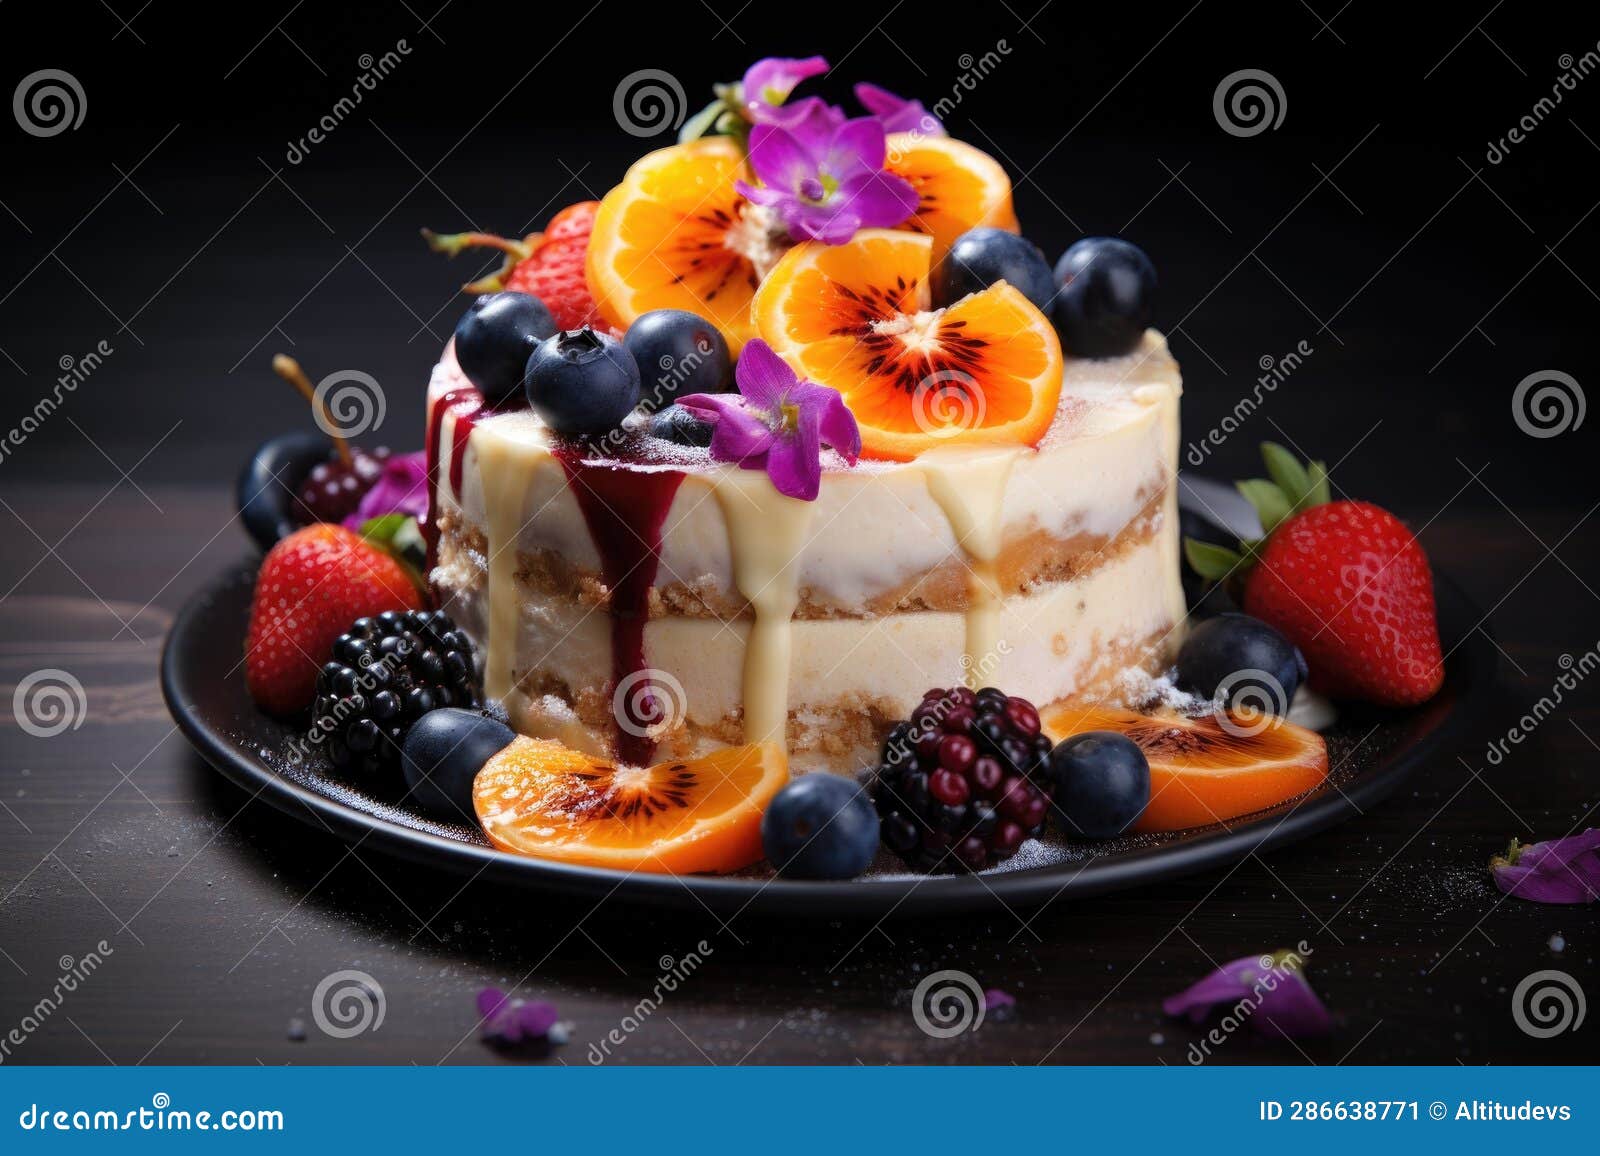 Homemade Cheesecake with Fruit Topping Arrangement Stock Image - Image ...